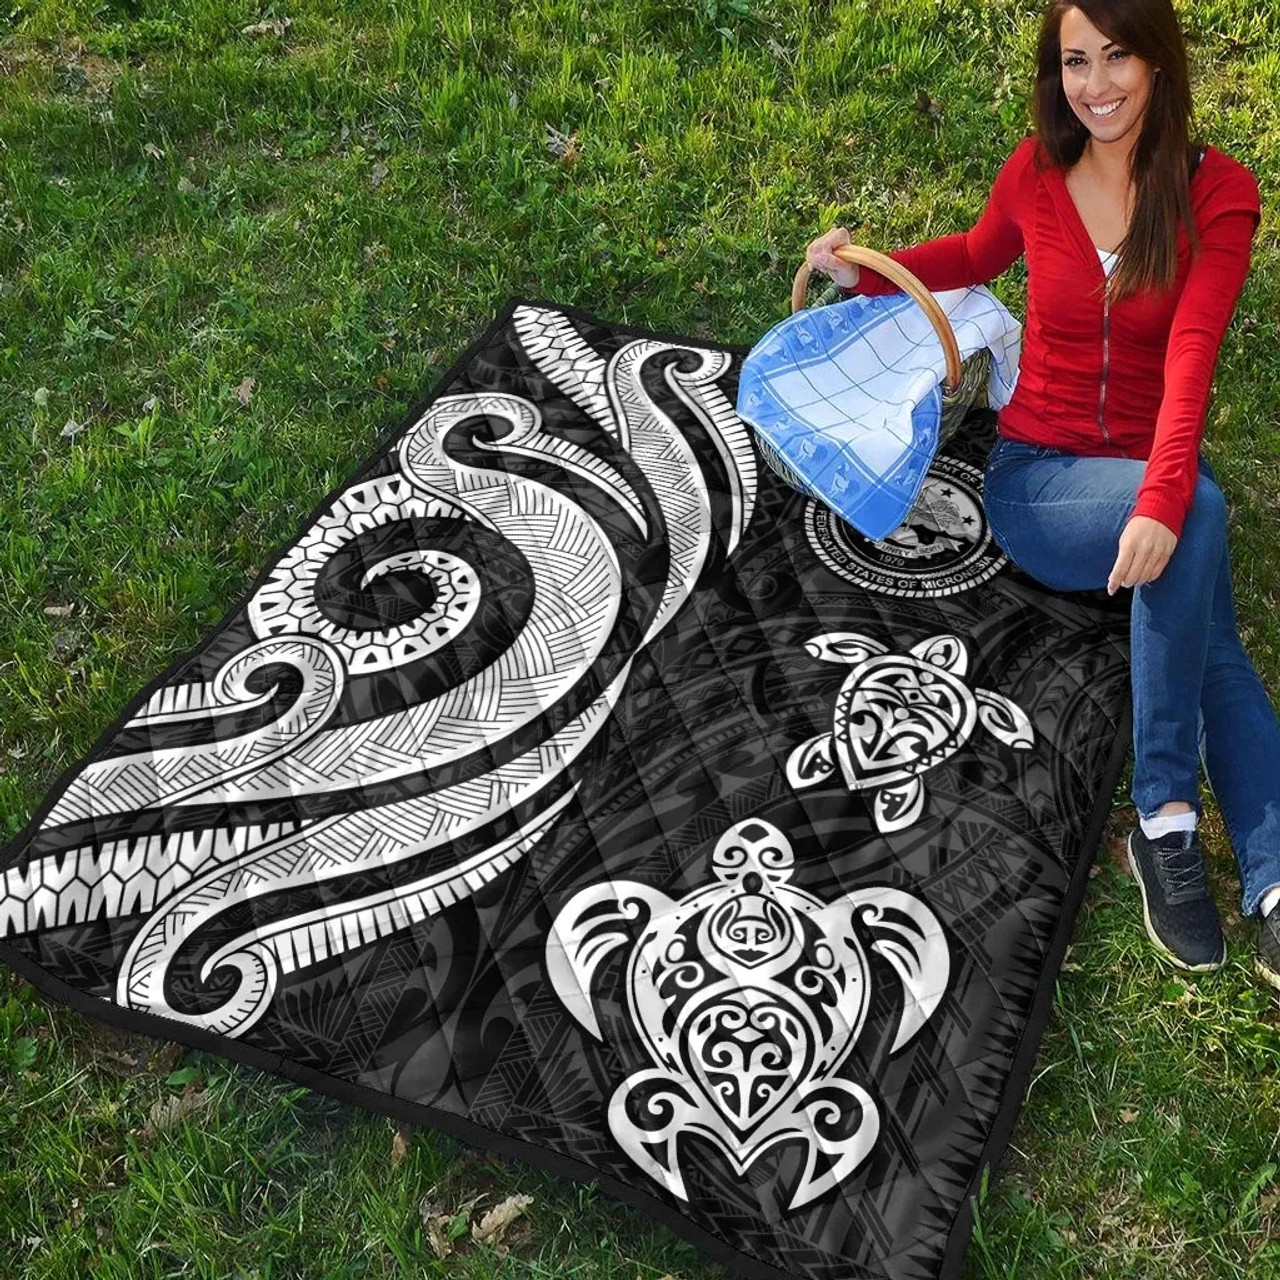 Federated States of Micronesia Premium Quilt - White Tentacle Turtle 4